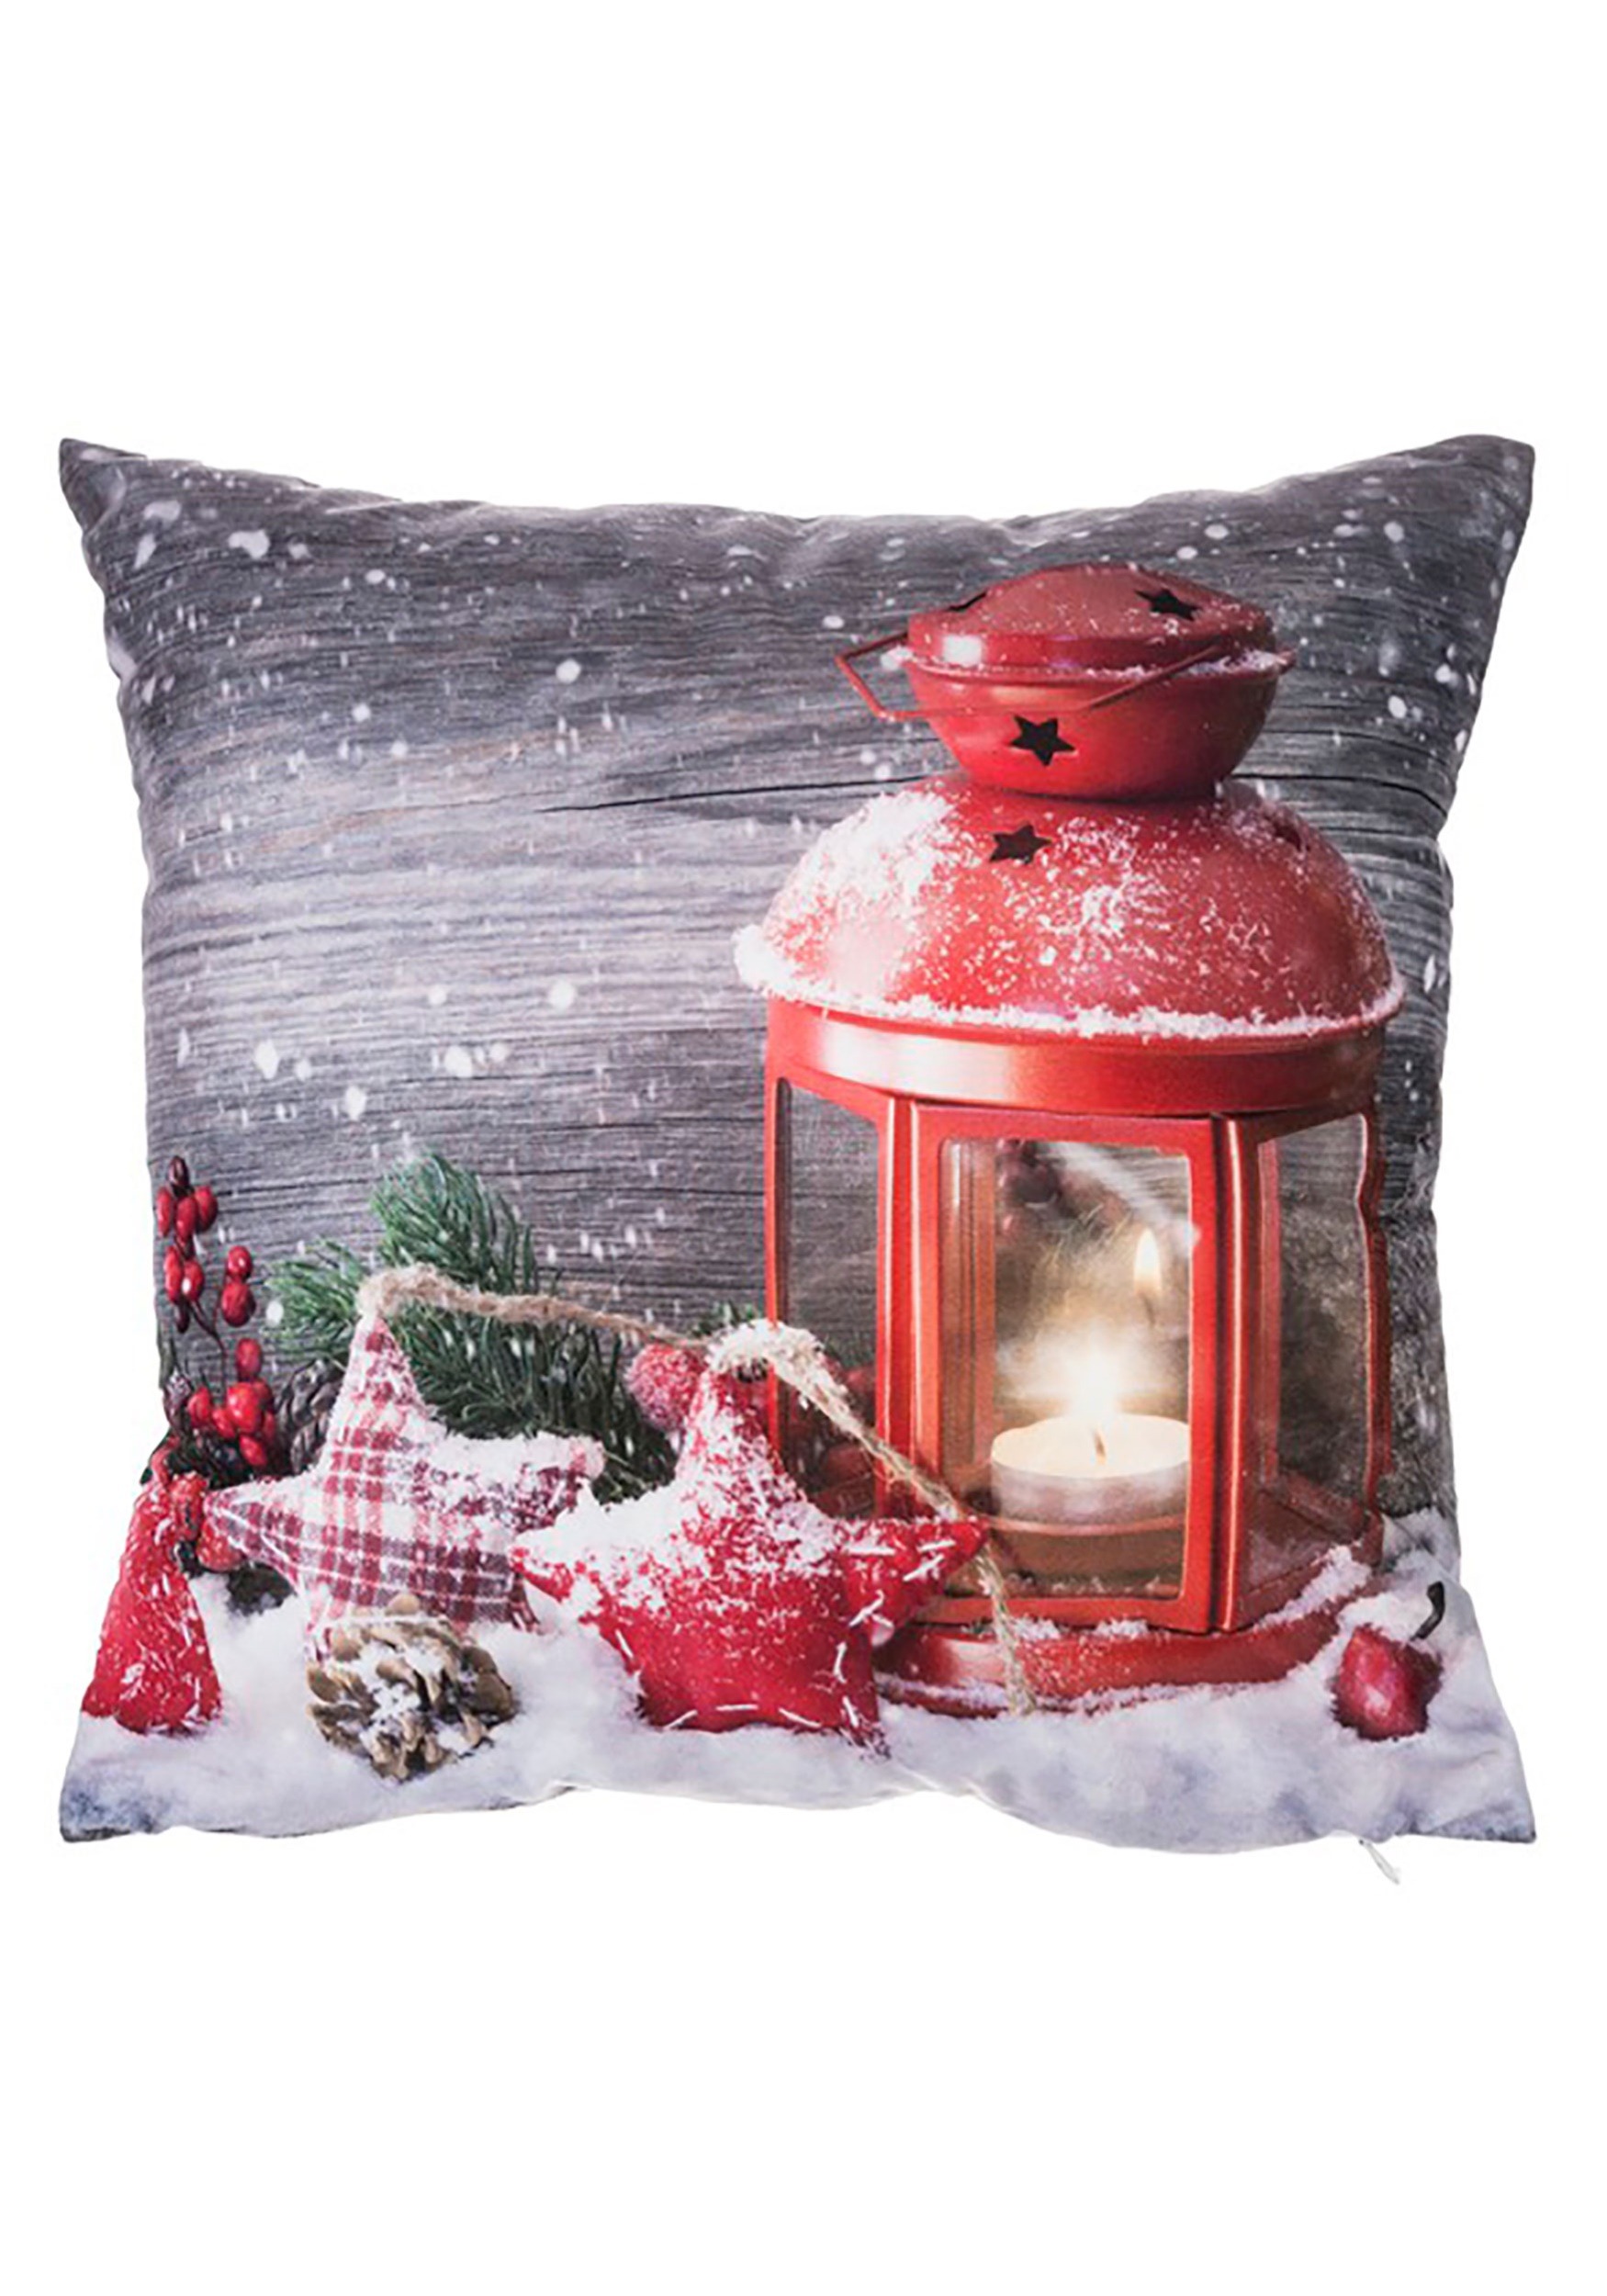 16" Christmas Red Lantern Pillow with LED Lights